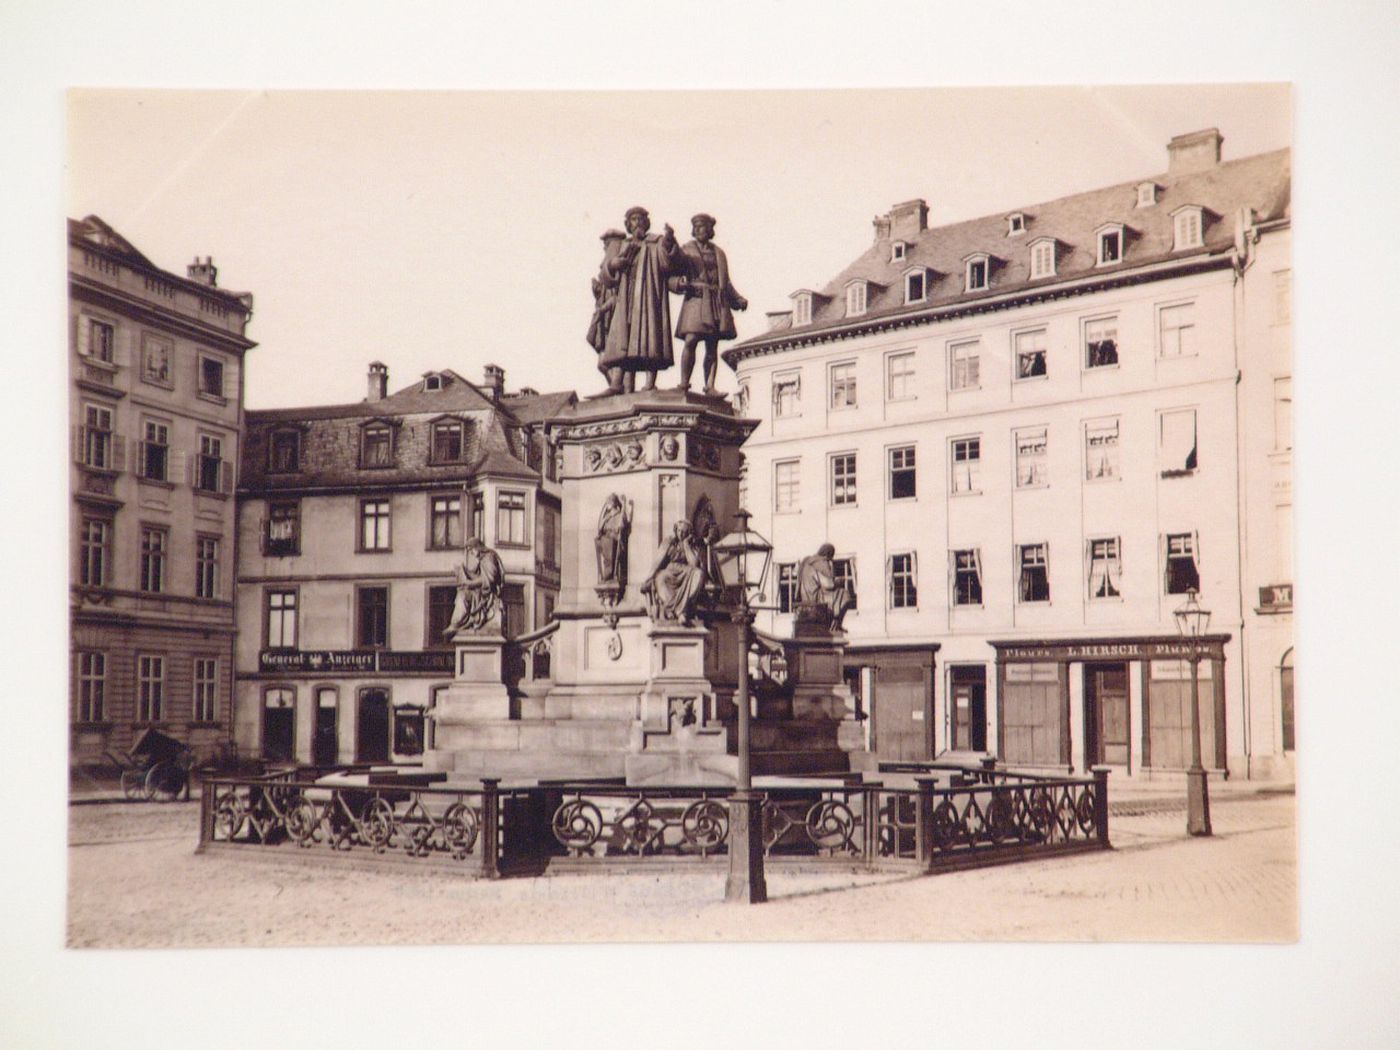 View of a monument to Gutenberg, Fust and Schöffer in a town [?] square with stores and apartment houses in the background, Germany